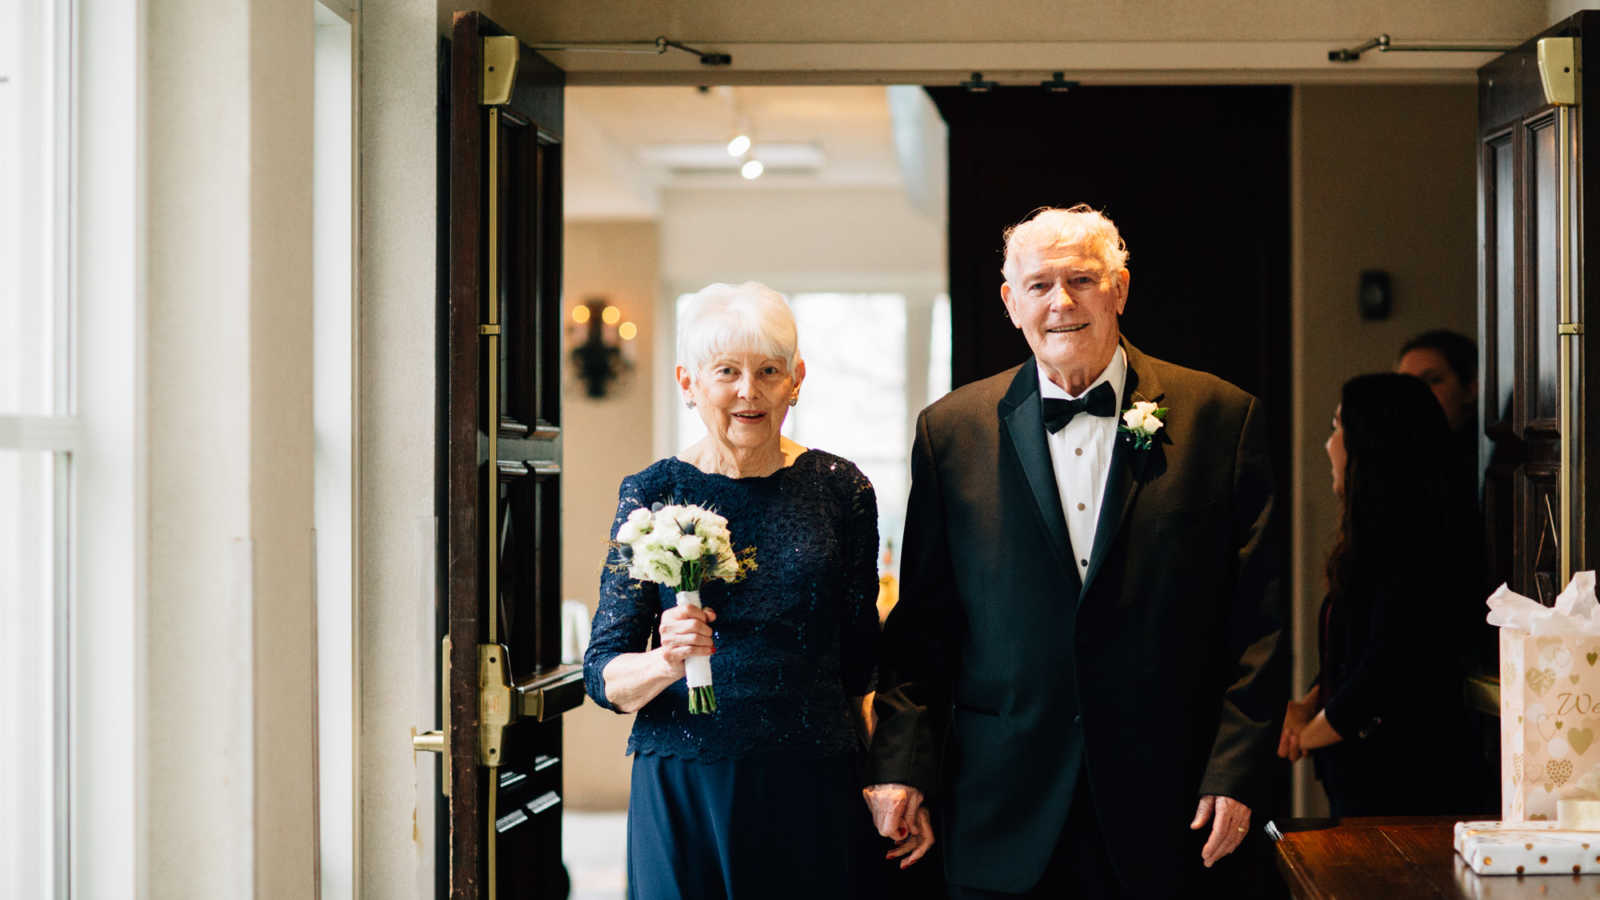 83 year old groom and 77 year old bride smile as they walk hand in hand